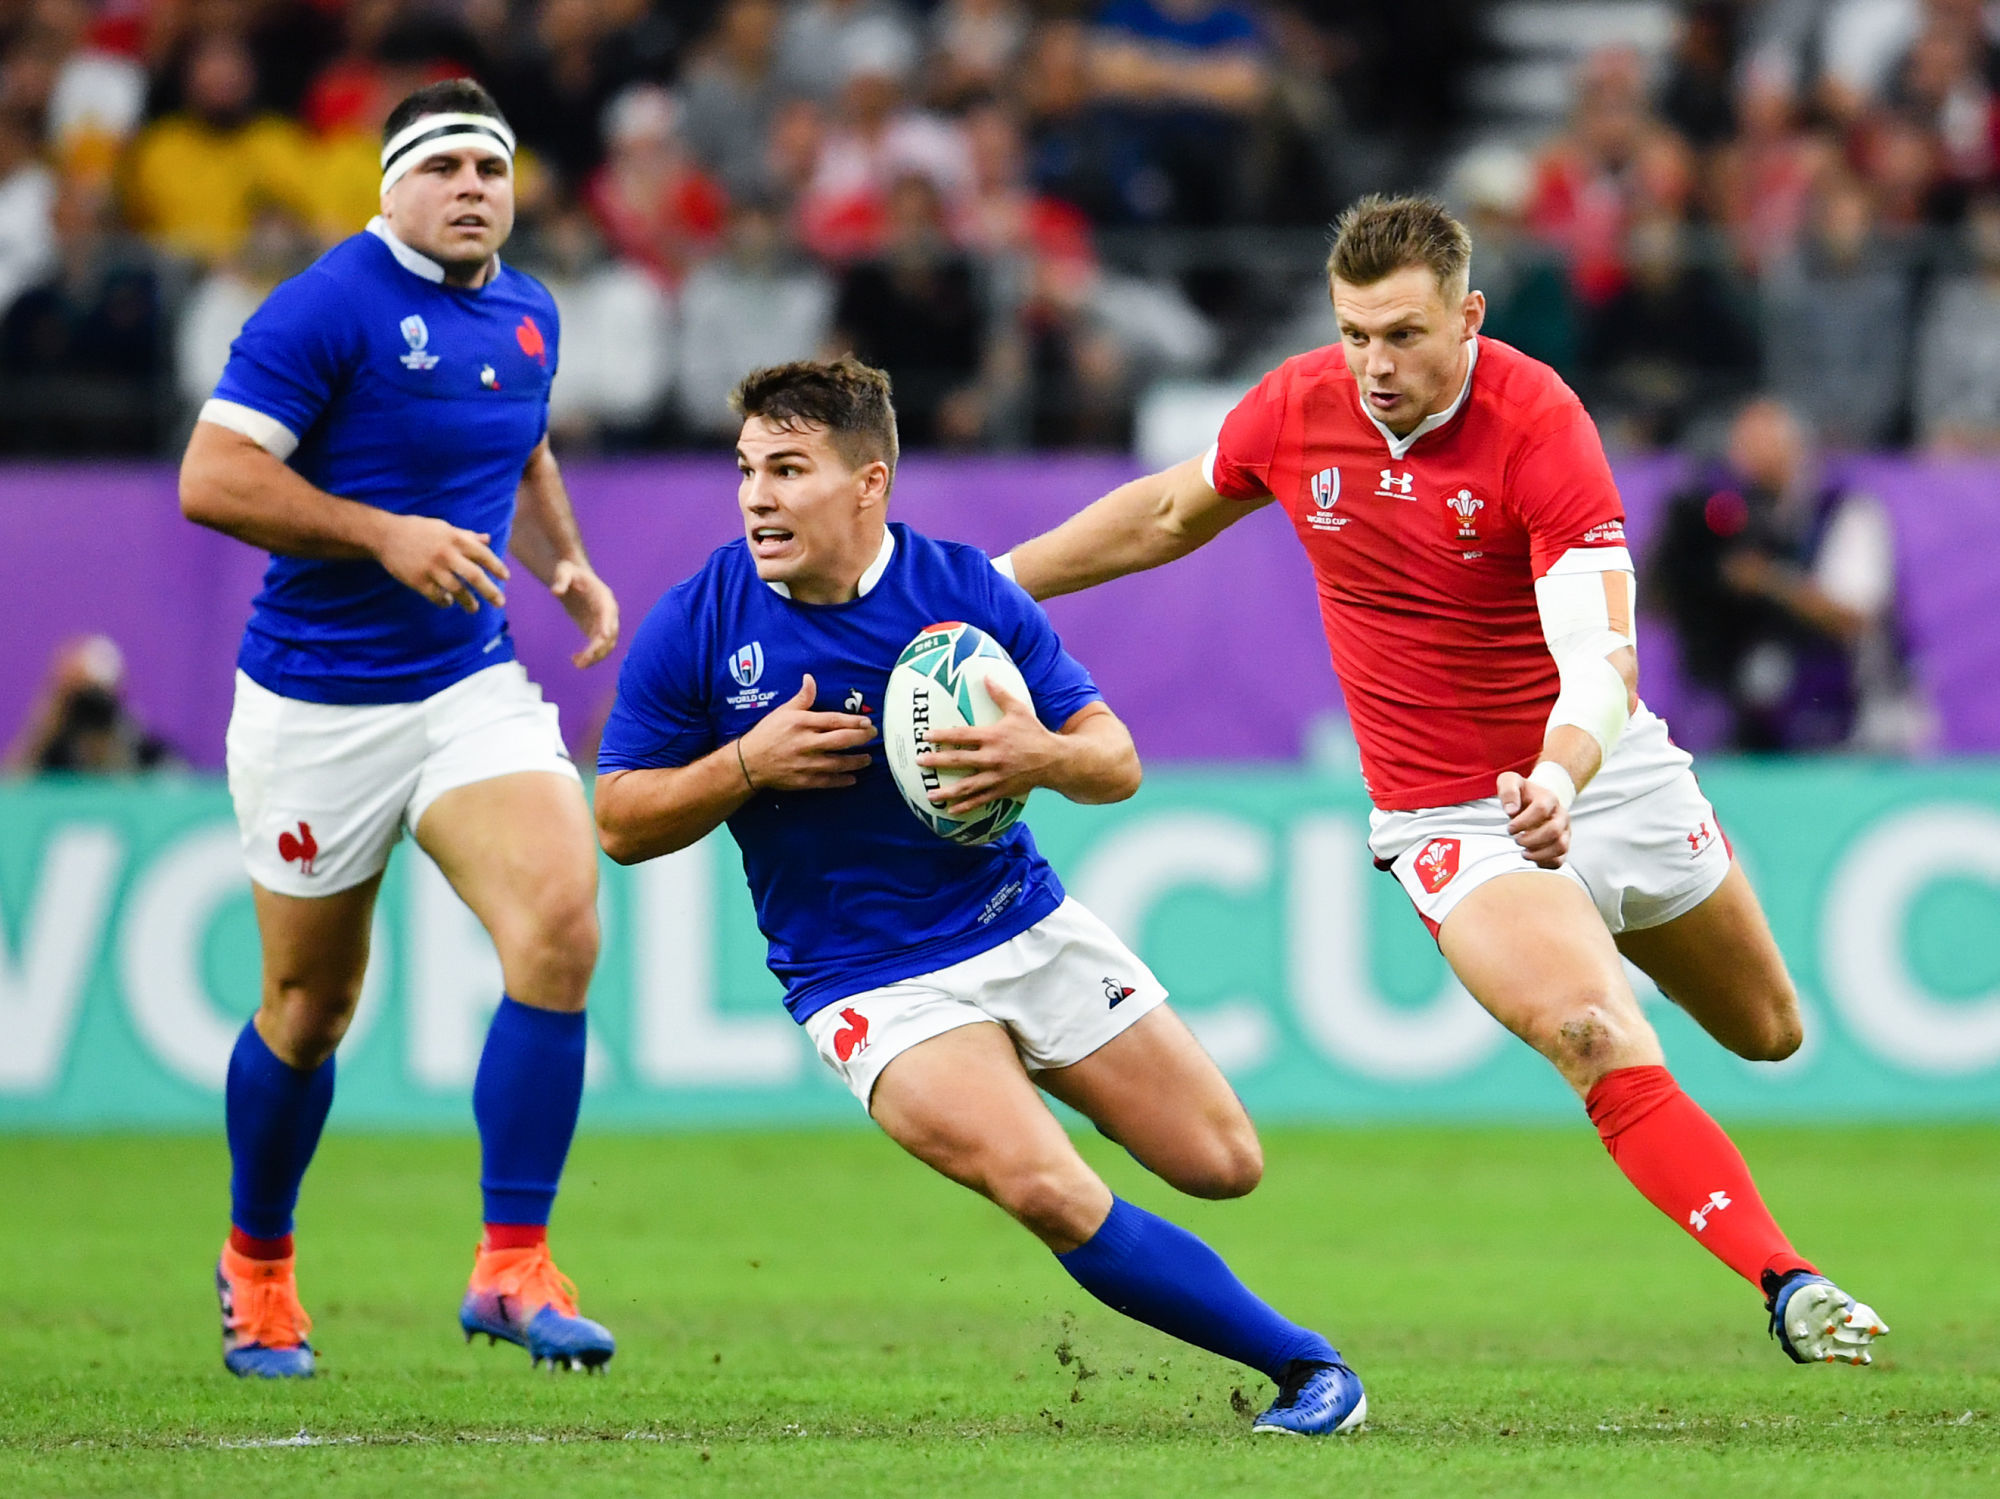 Frances's Antoine Dupont evades the tackle of Wales' Dan Biggar during the 2019 Rugby World Cup Quarter Final match at Oita Stadium. 

Photo by Icon Sport - Antoine DUPONT - Dan BIGGAR - Oita Stadium - Oita (Japon)